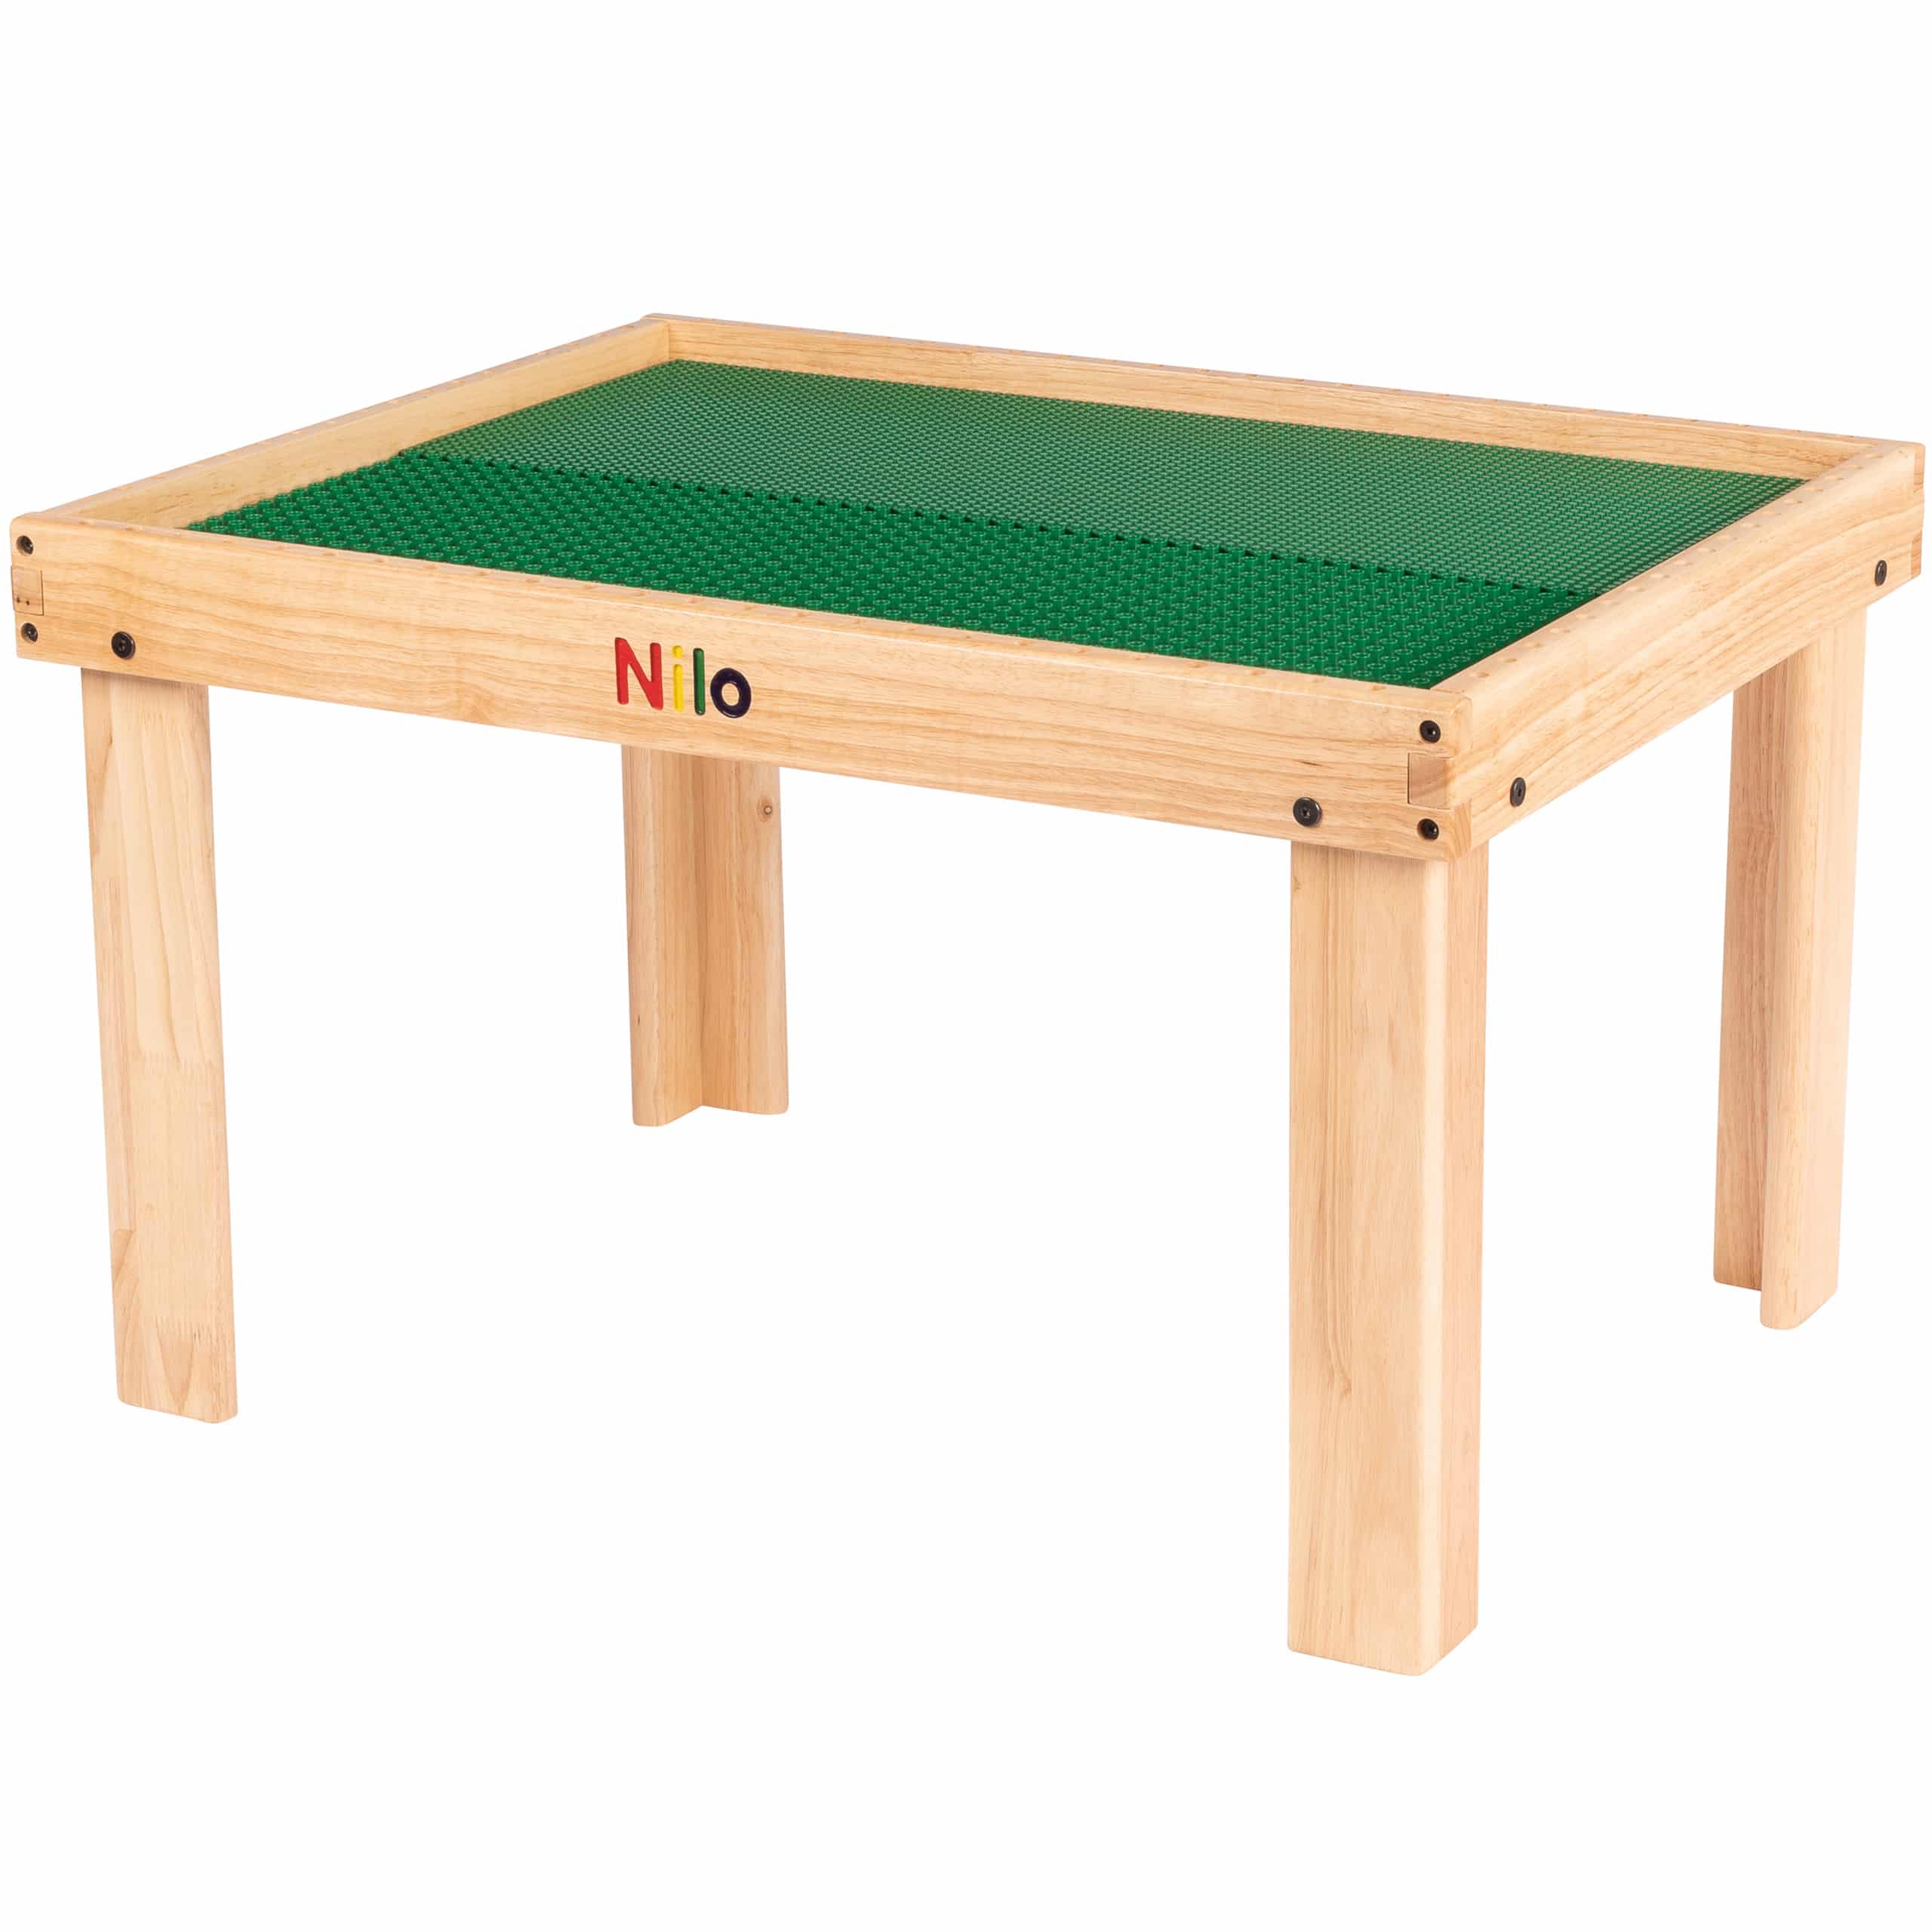 Small Activity Toy Table for Kids | Baseplates Included